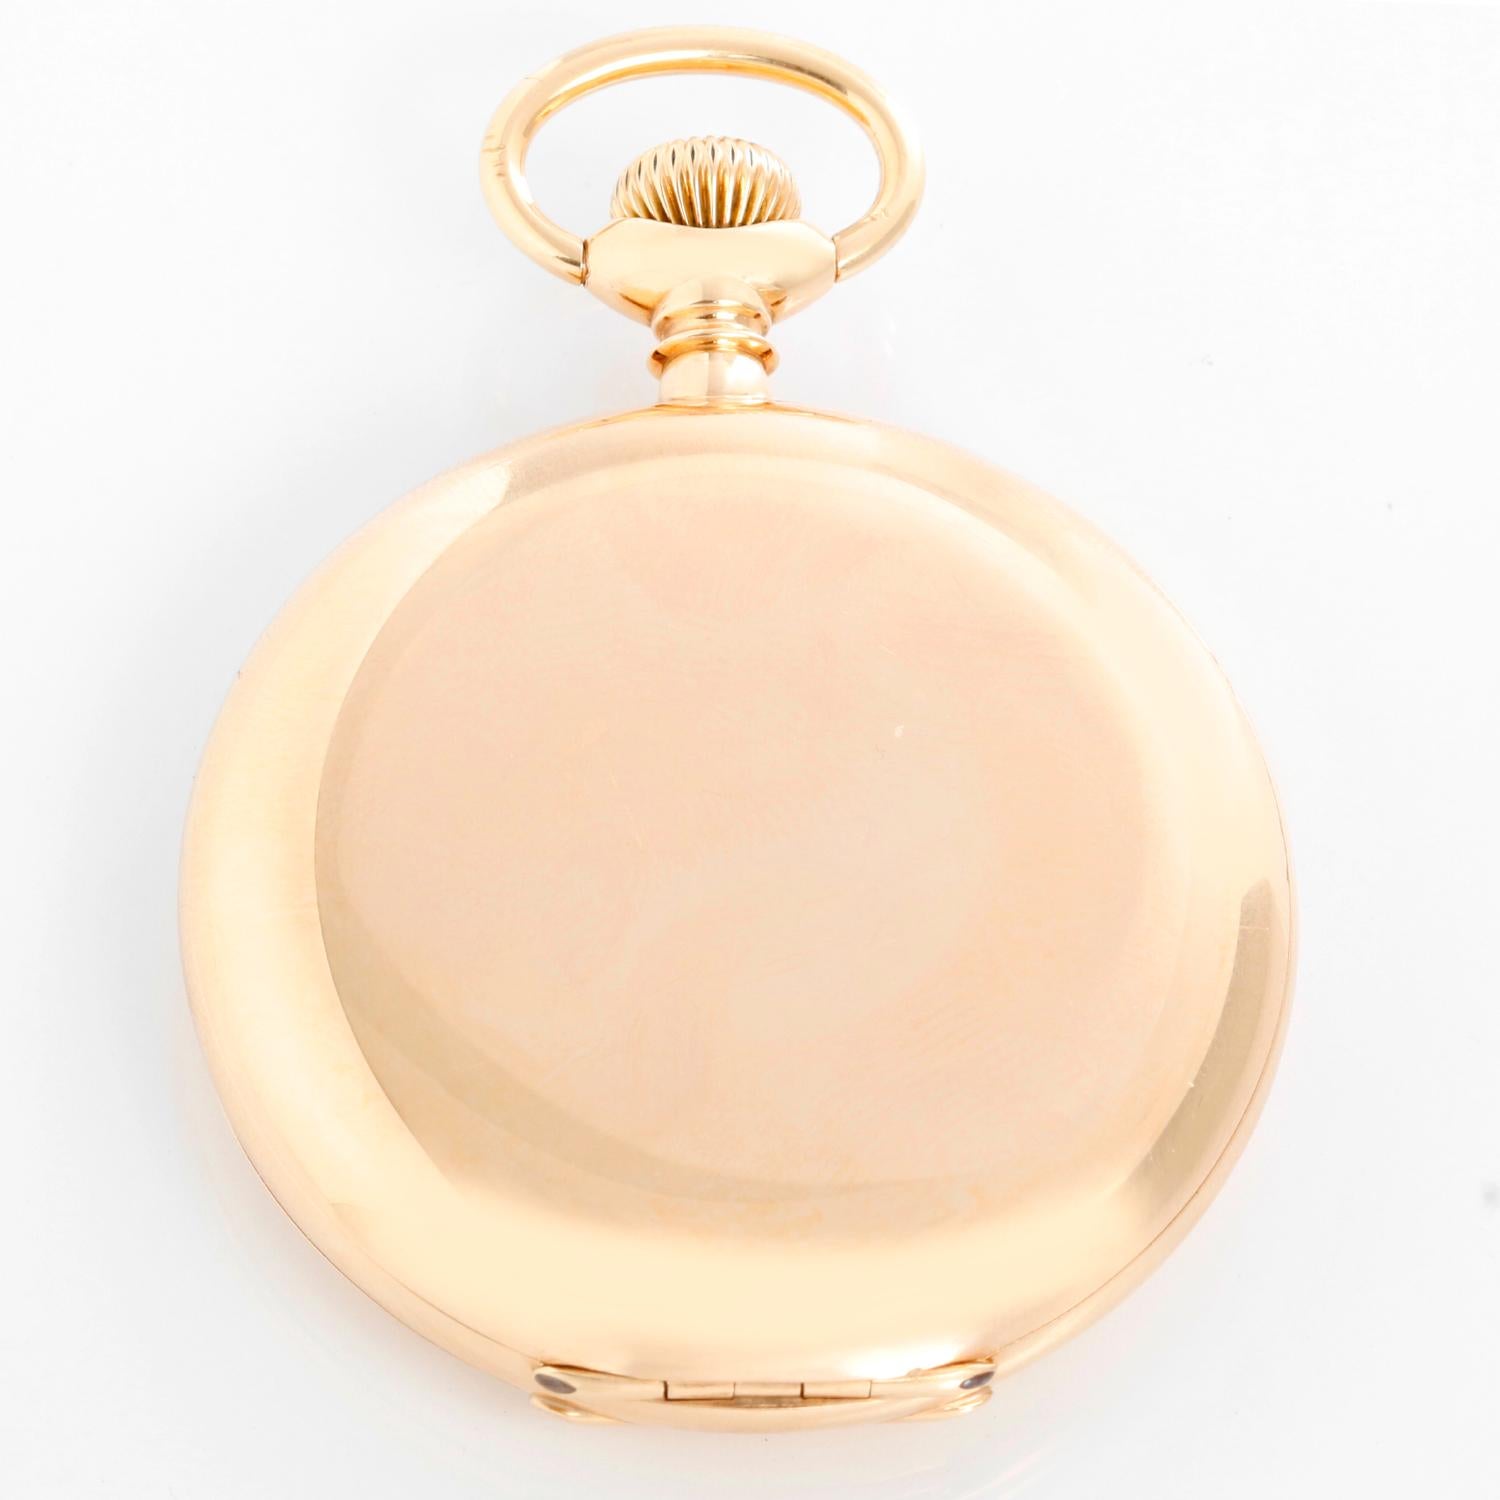 Patek Philippe 14K Yellow Gold Pocket Watch - Manual winding. 14K Yellow gold hunter case (50 mm ). White enamel dial with Roman numerals; subdial at 6 o'clock. Pre-owned with custom box.  Marked for retailer Mermod & Jaccard of St. Louis.